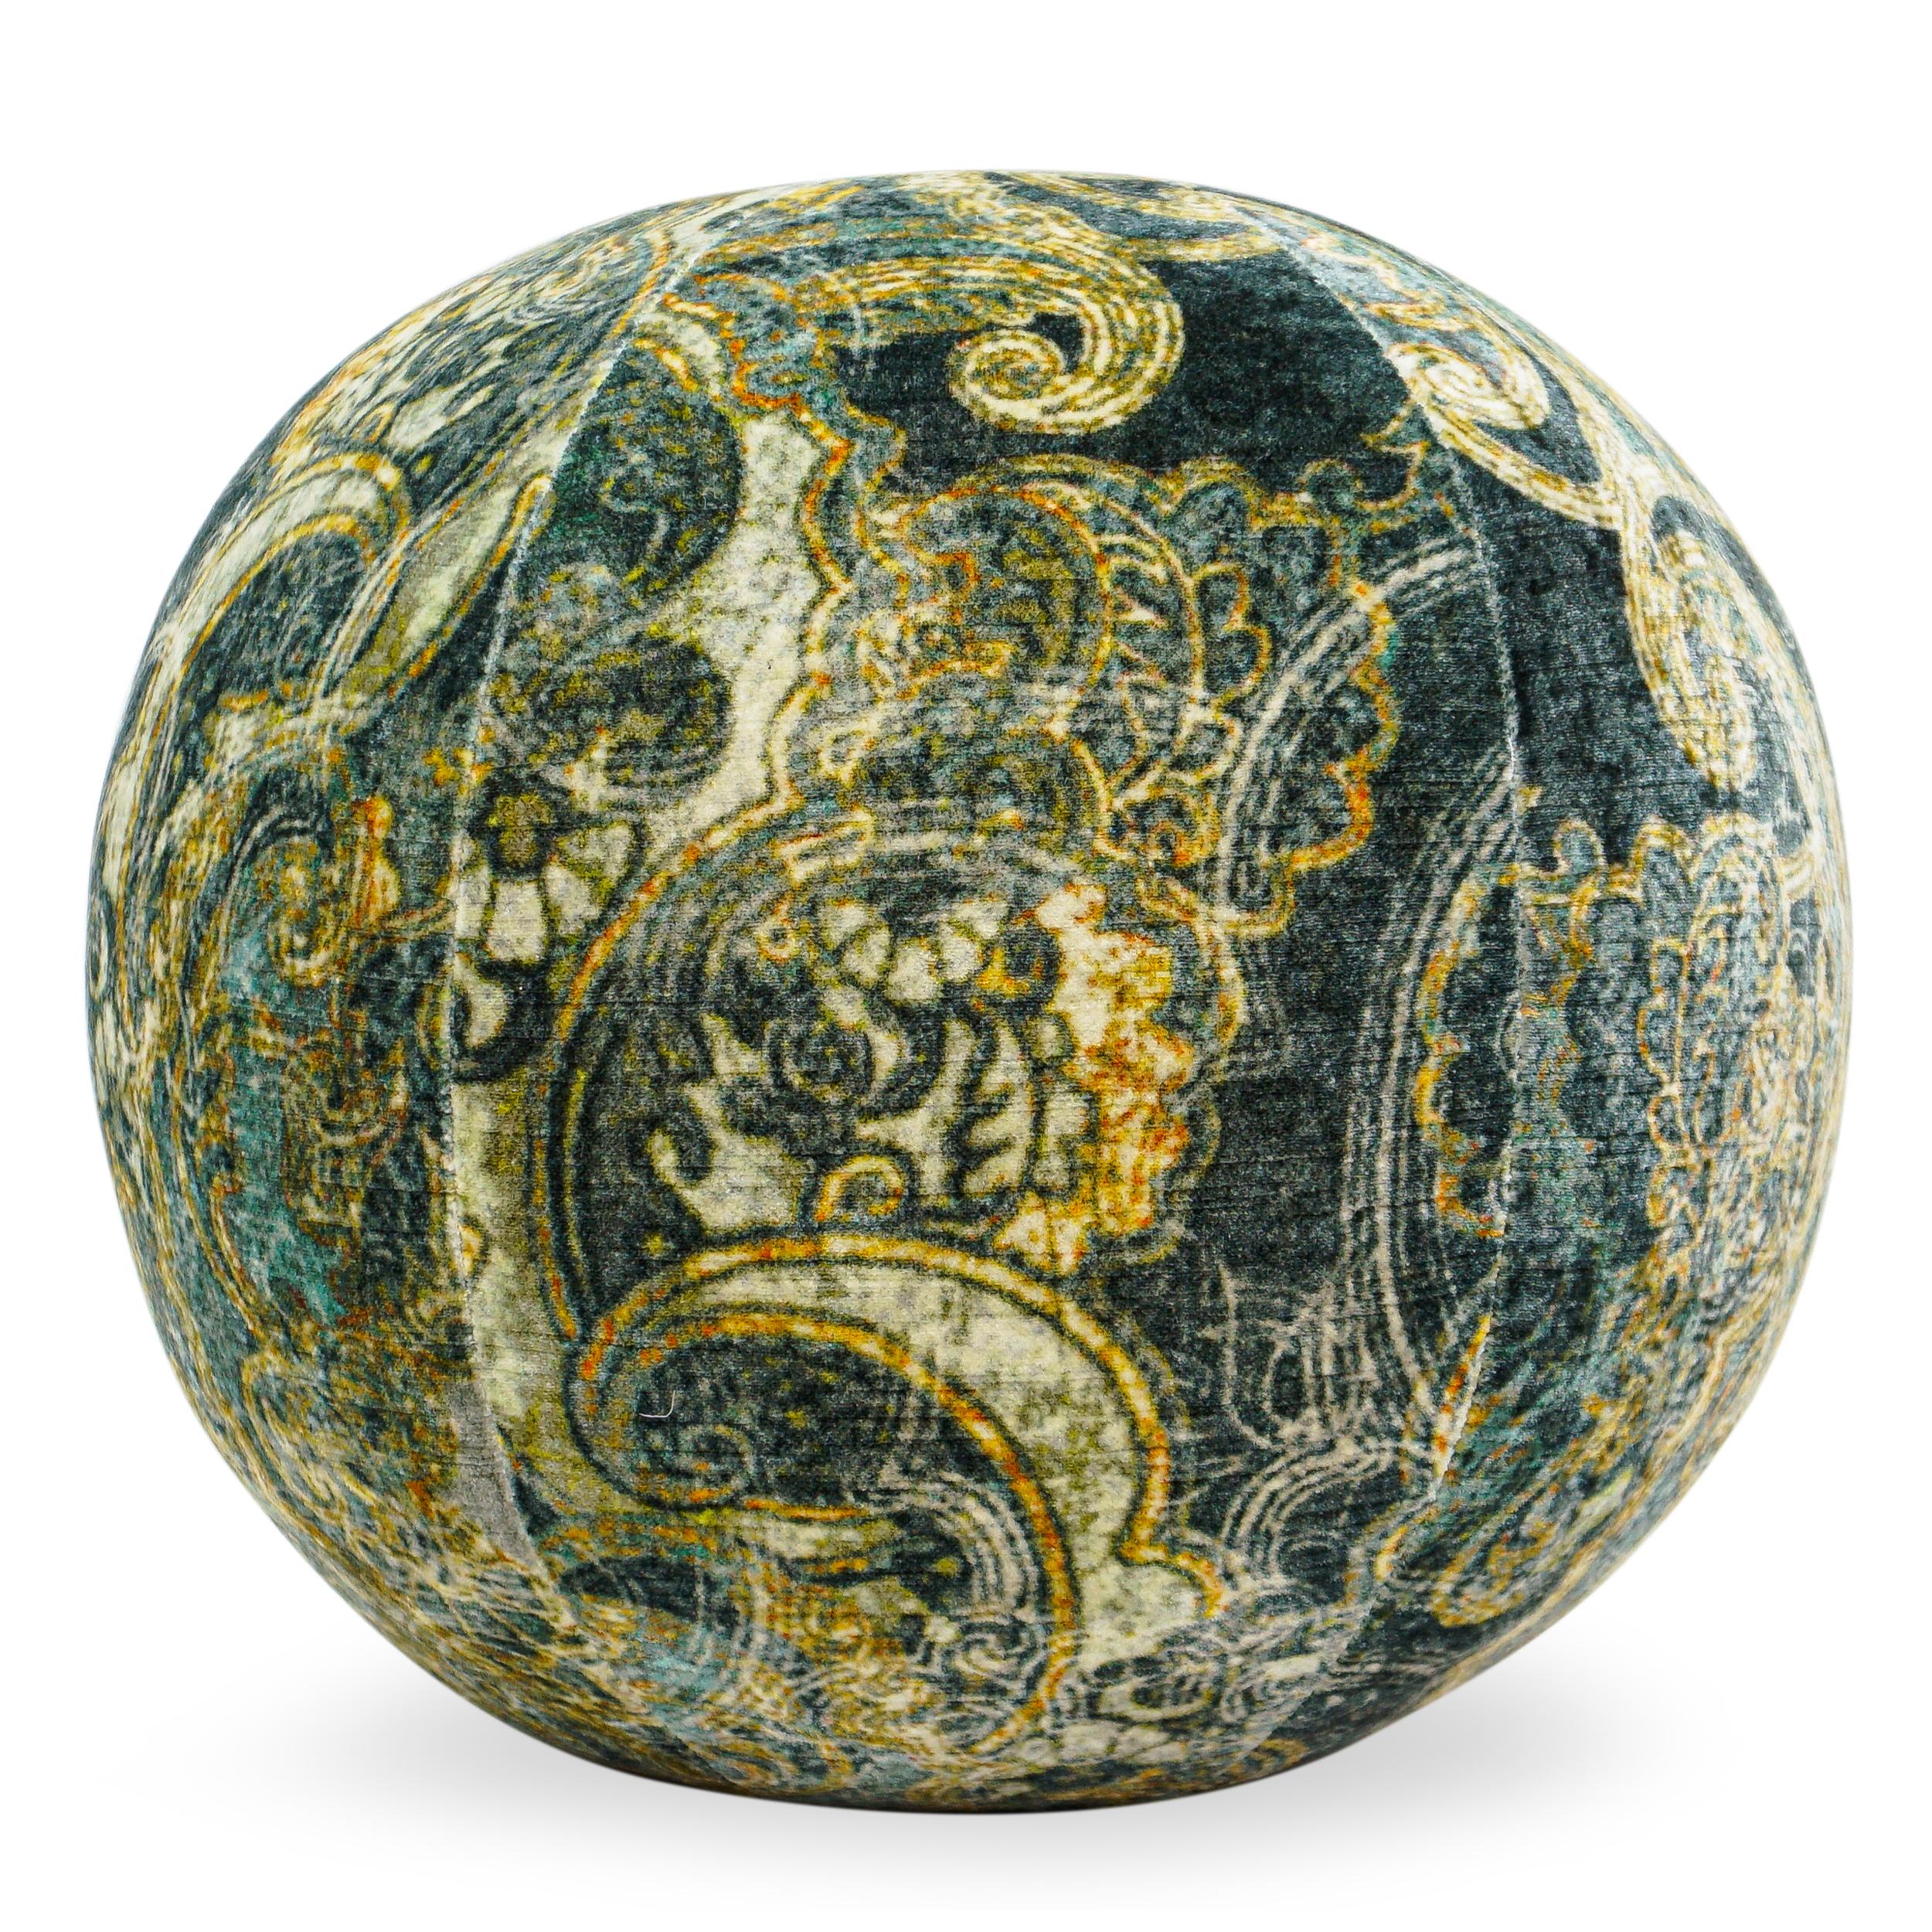 Distressed looking printed velvet in golds, blues and greens. Works well with bohemian and moroccan motifs.

Measurements:
Overall: 12”W x 12”H
Disclaimer: Due to their handcrafted nature, the final size and shape of our Ball Pillows may vary